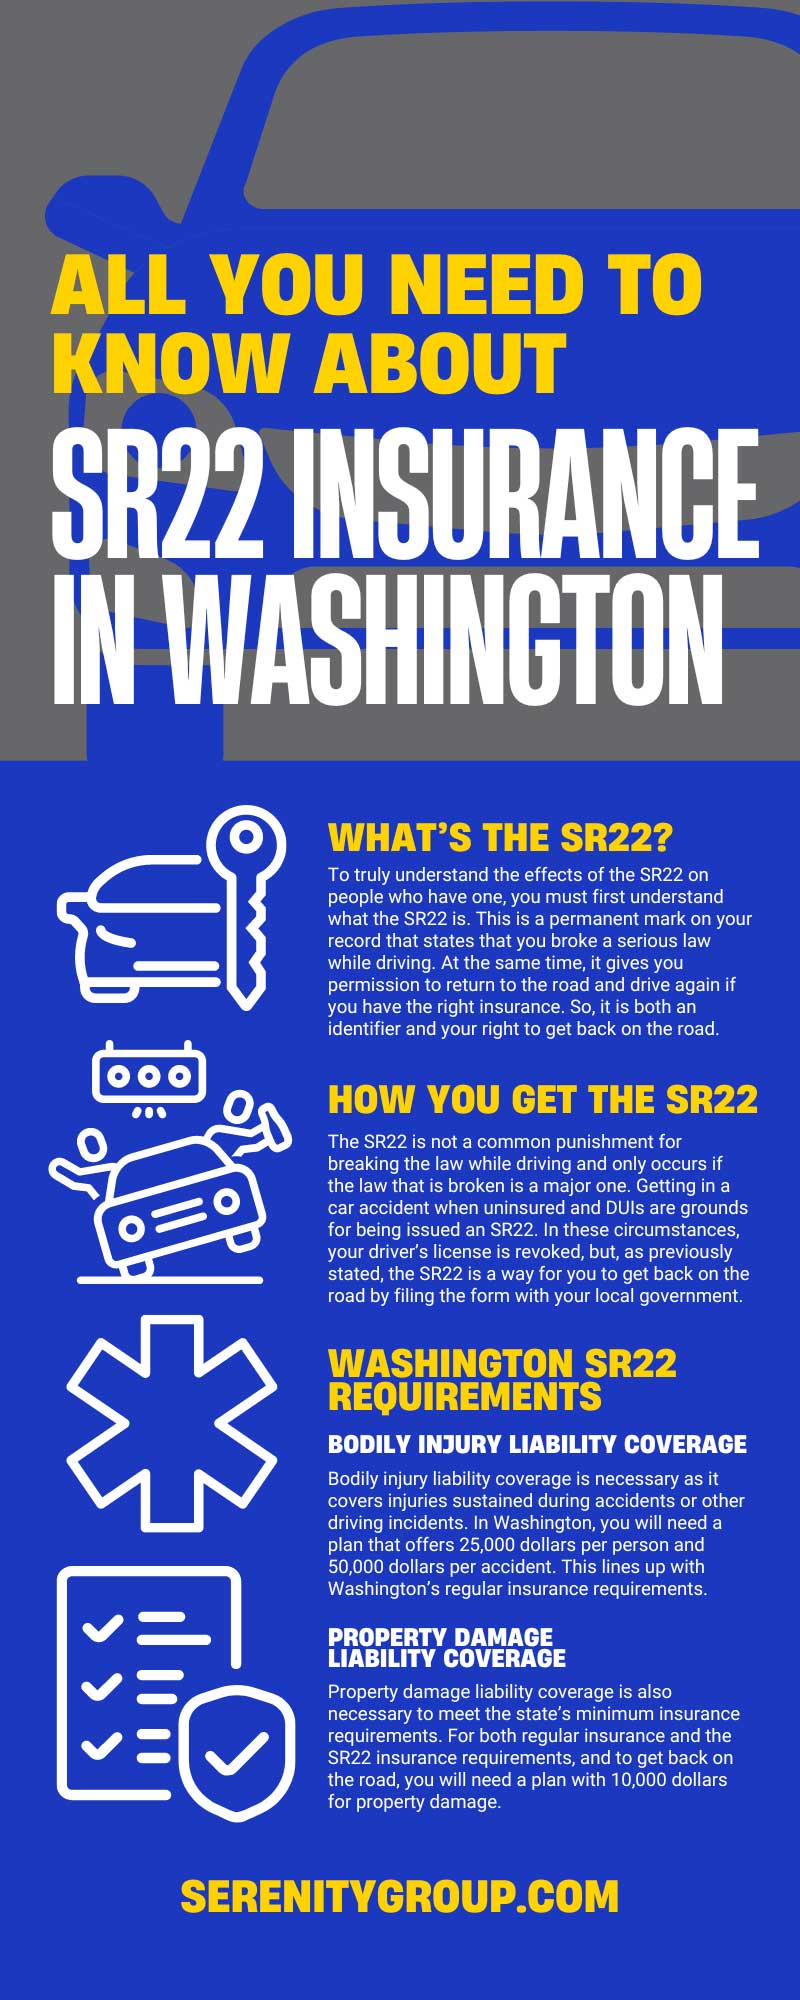 All You Need To Know About SR22 Insurance in Washington